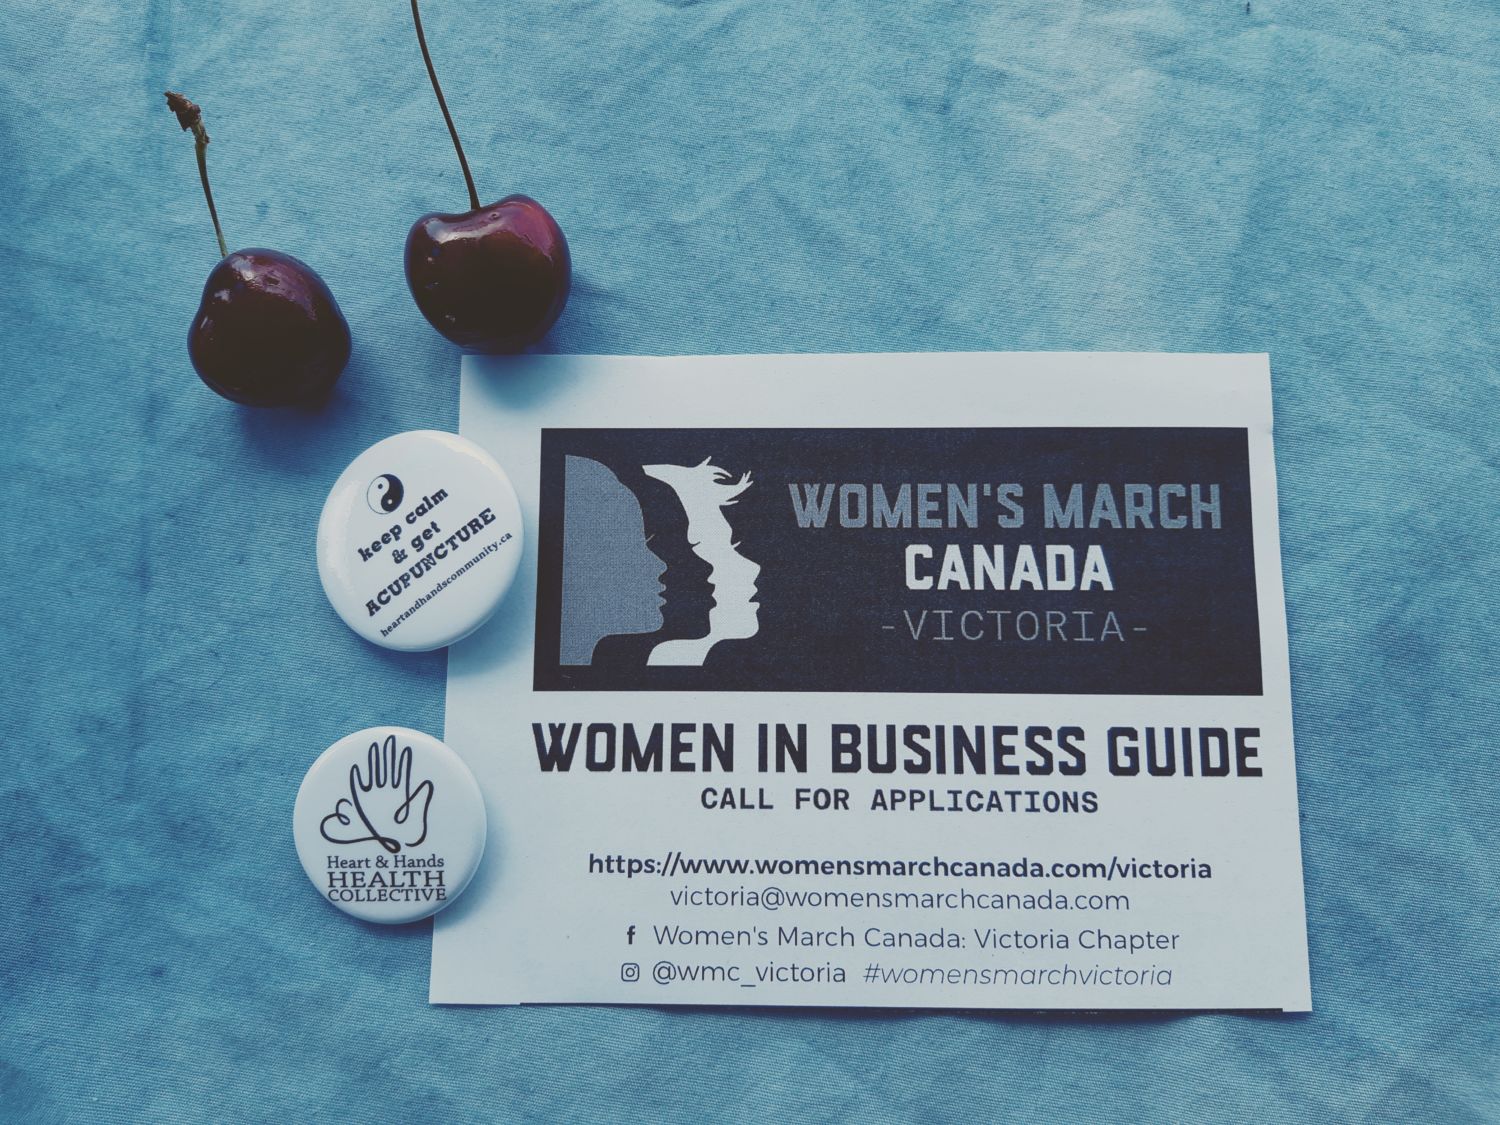 Women's March Canada, Victoria Chapter flyer, Women in Business Guide call for applications.